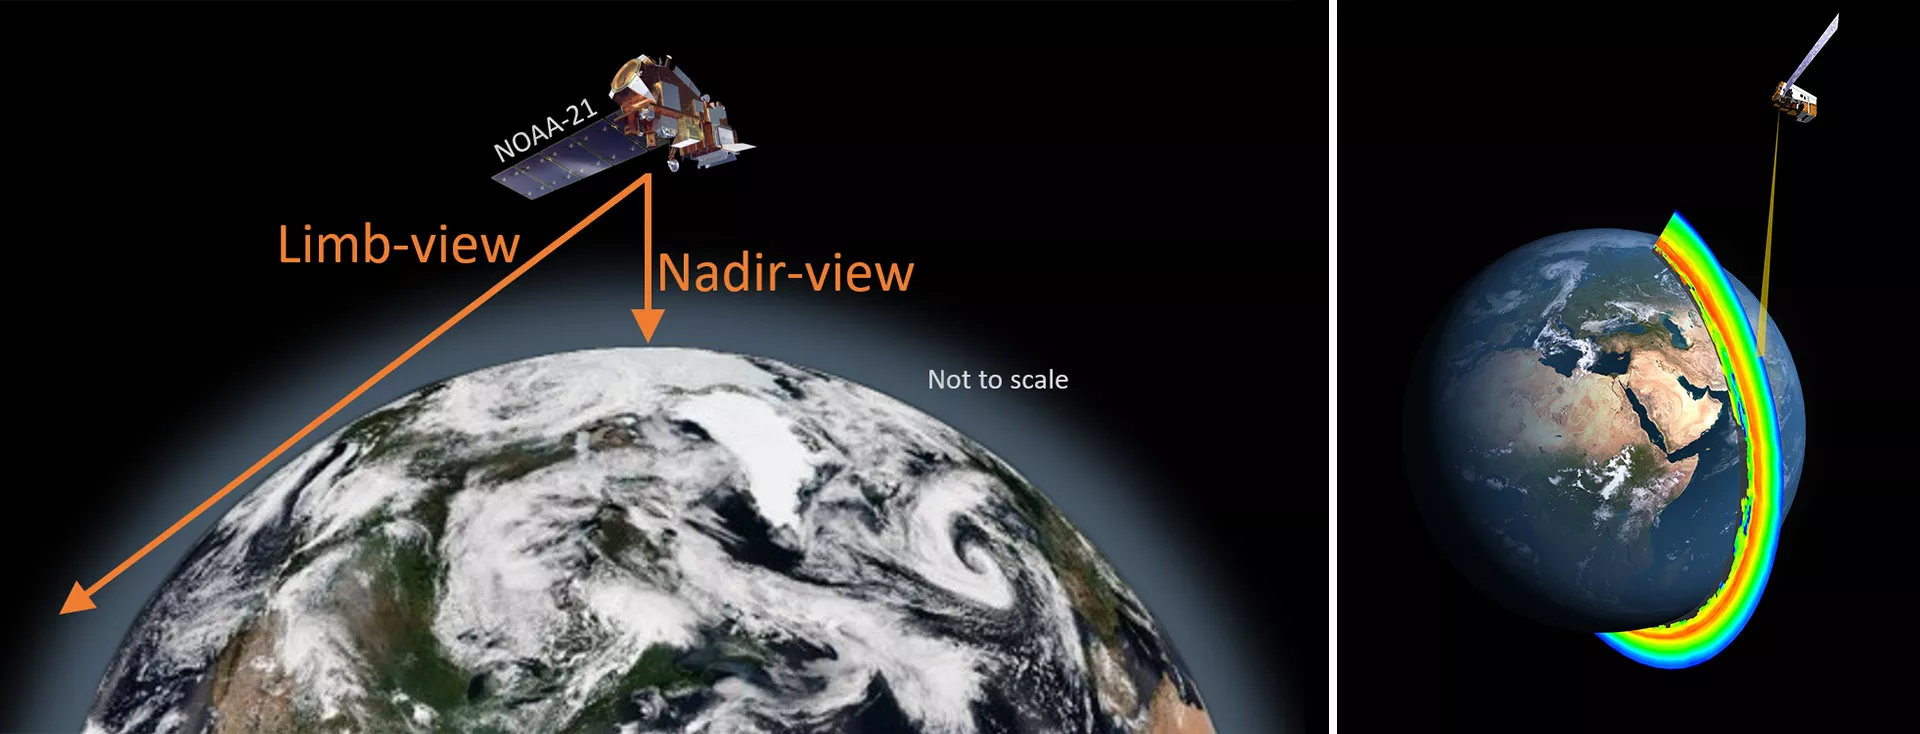 Left image: The image depicts a graphical representation of the NOAA-21 satellite in orbit around the Earth. Two arrows extend from the satellite towards the Earth, each labeled with a different viewing perspective. The arrow pointing directly down to the Earth is labeled "Nadir-view," indicating a viewpoint looking straight down towards the Earth's surface. The second arrow, angling off to the side and pointing towards the Earth's horizon, is labeled "Limb-view," Right: The image shows an artistic represen